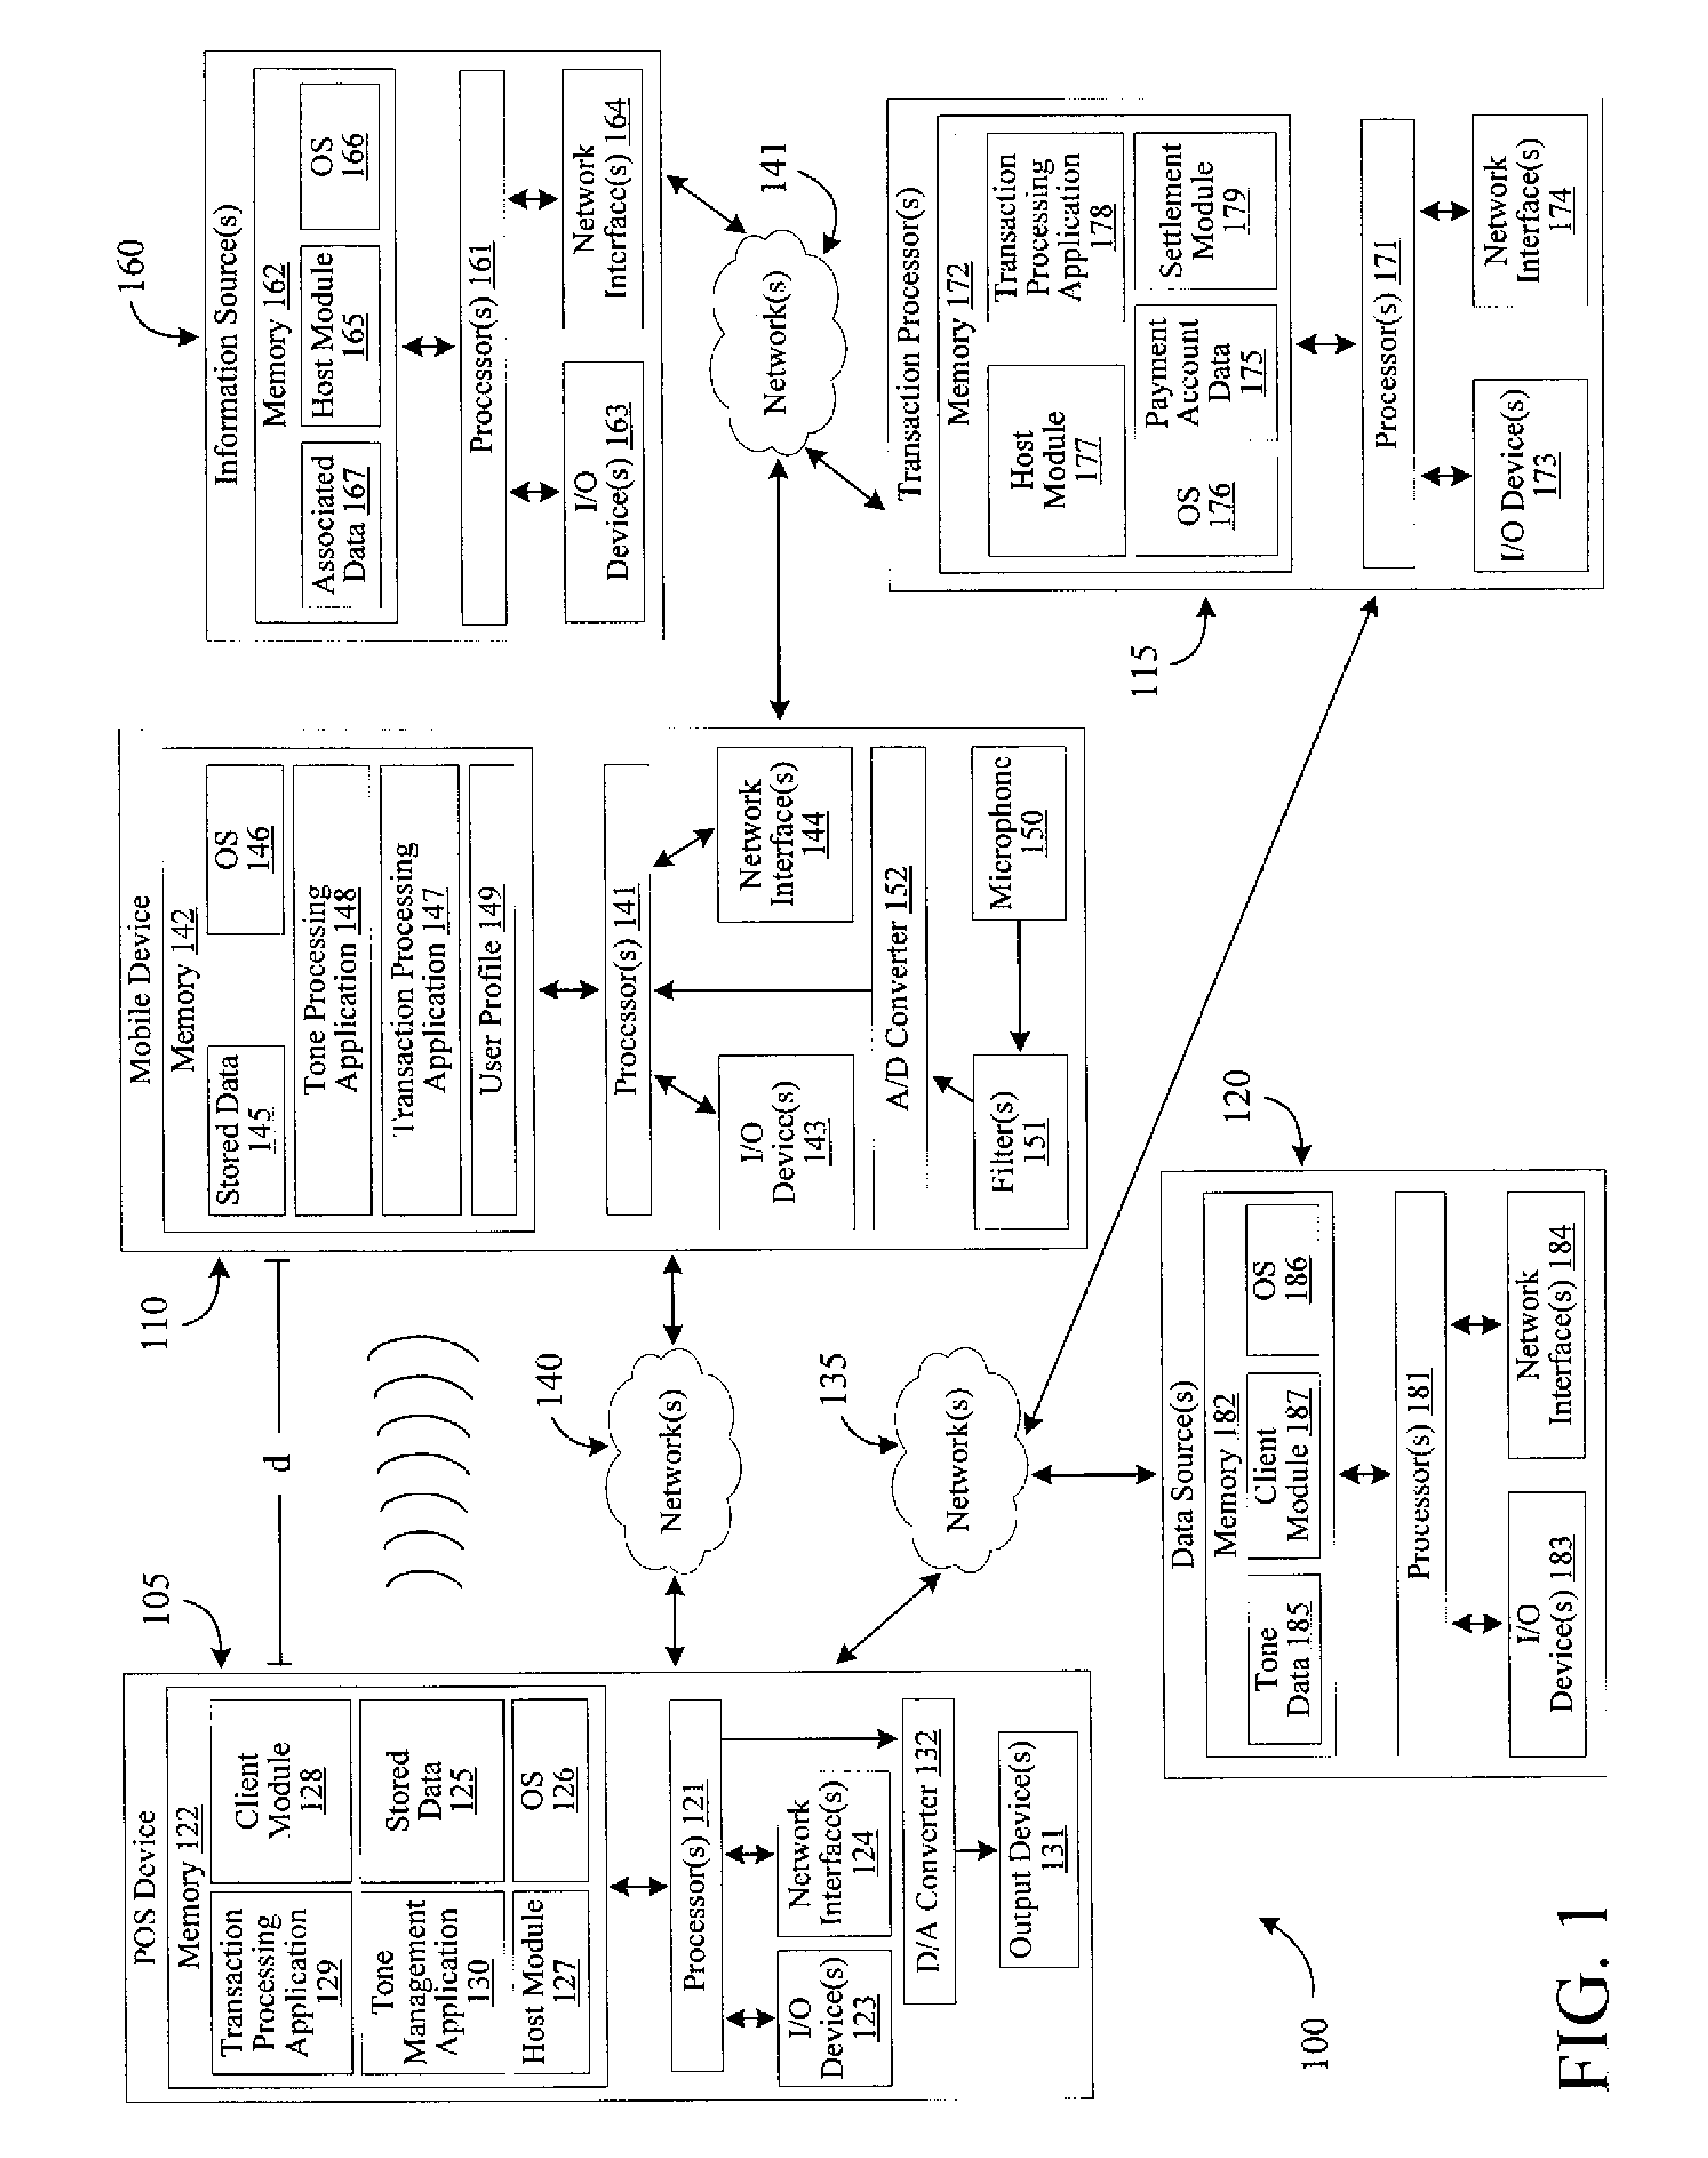 Systems, methods and apparatus for facilitating transactions using a mobile device